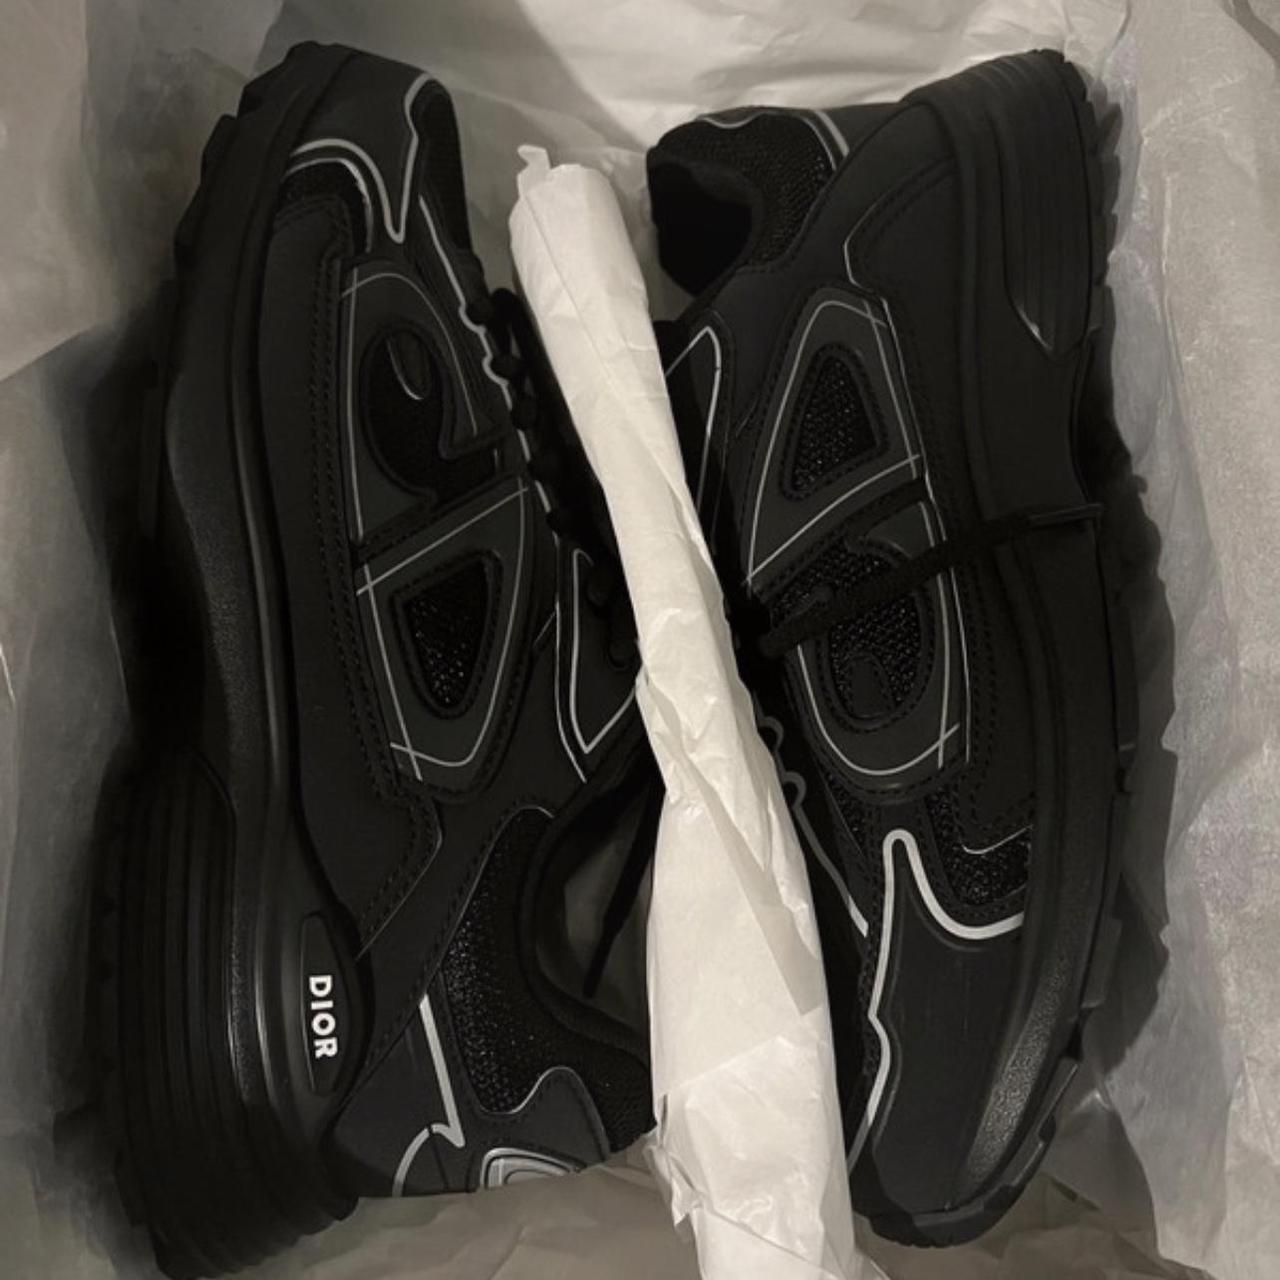 Dior B30s black Open to offers - Depop